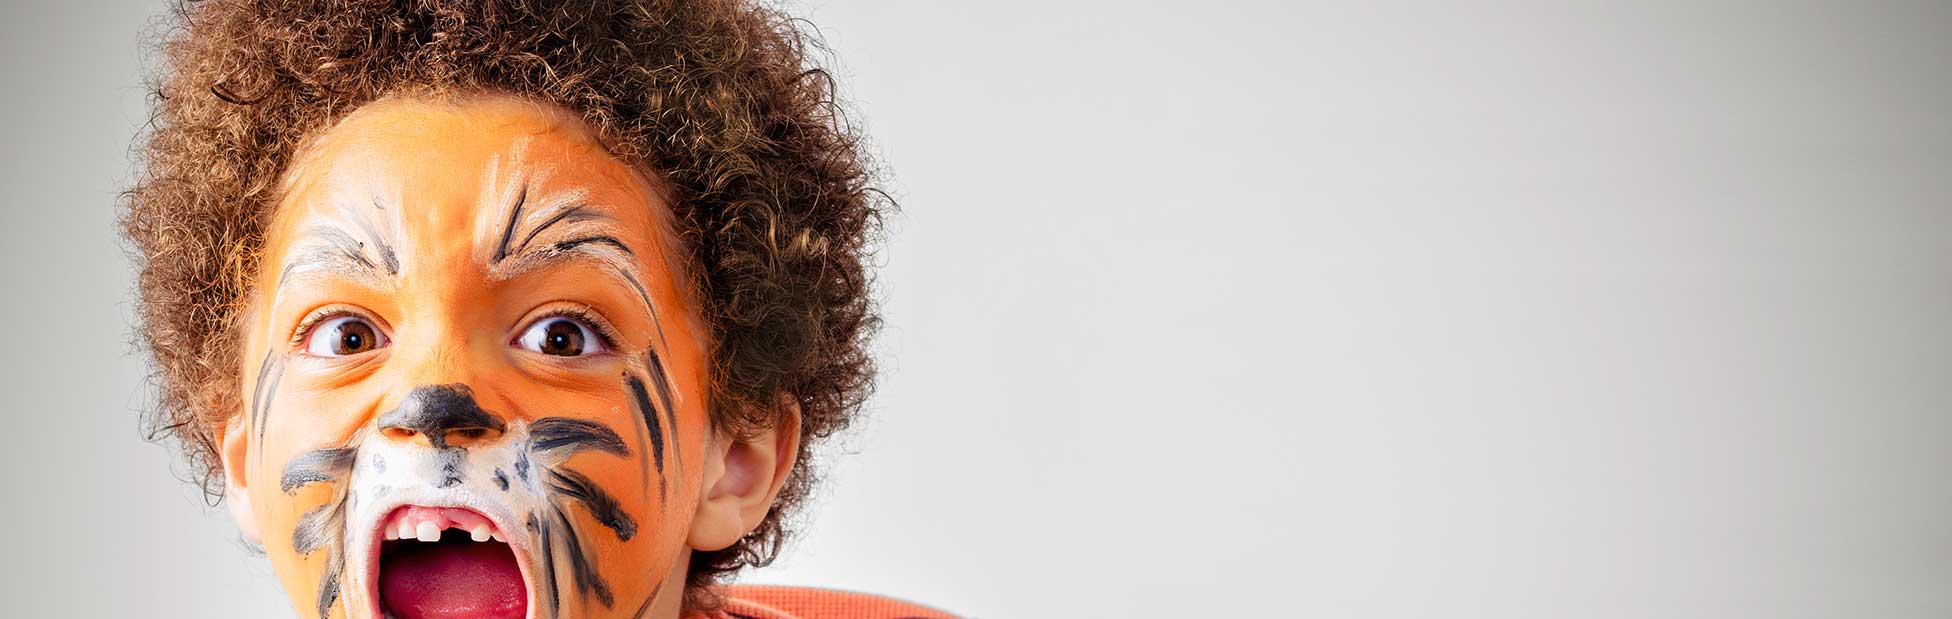 Boy with tiger facepaint